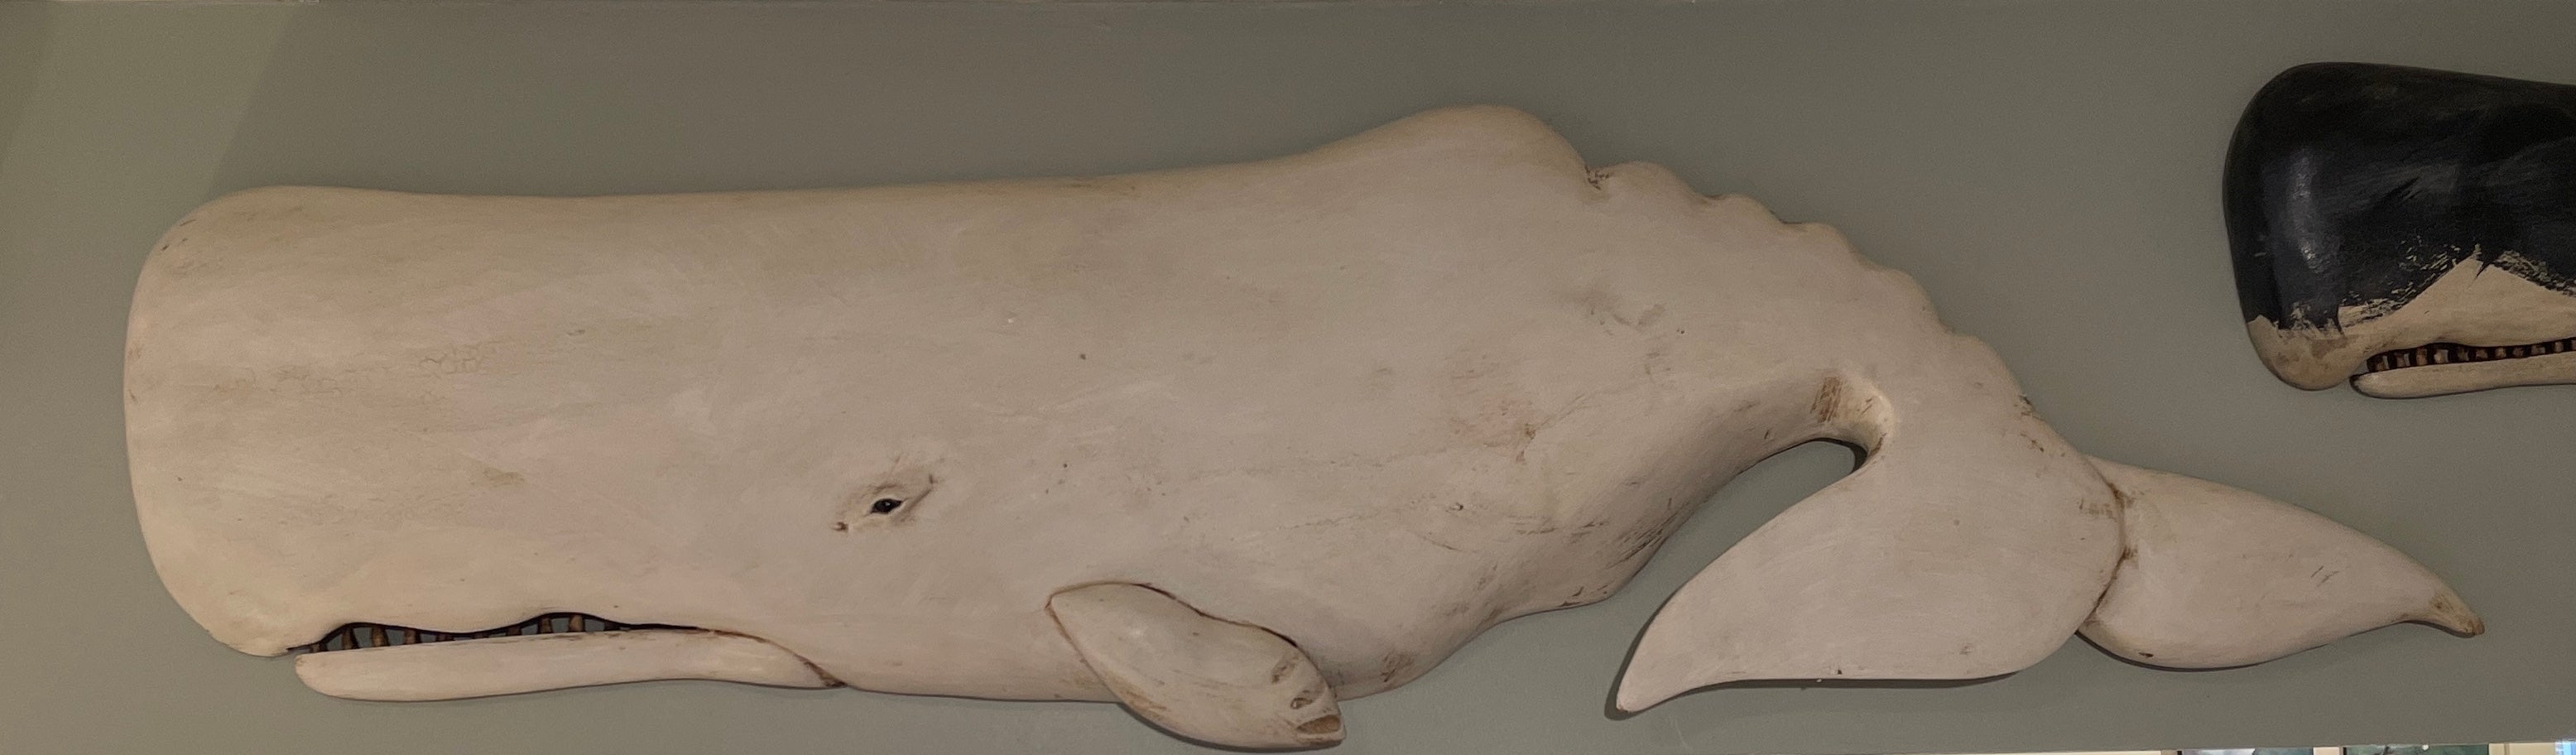 Moby White Sperm Whale Plaque